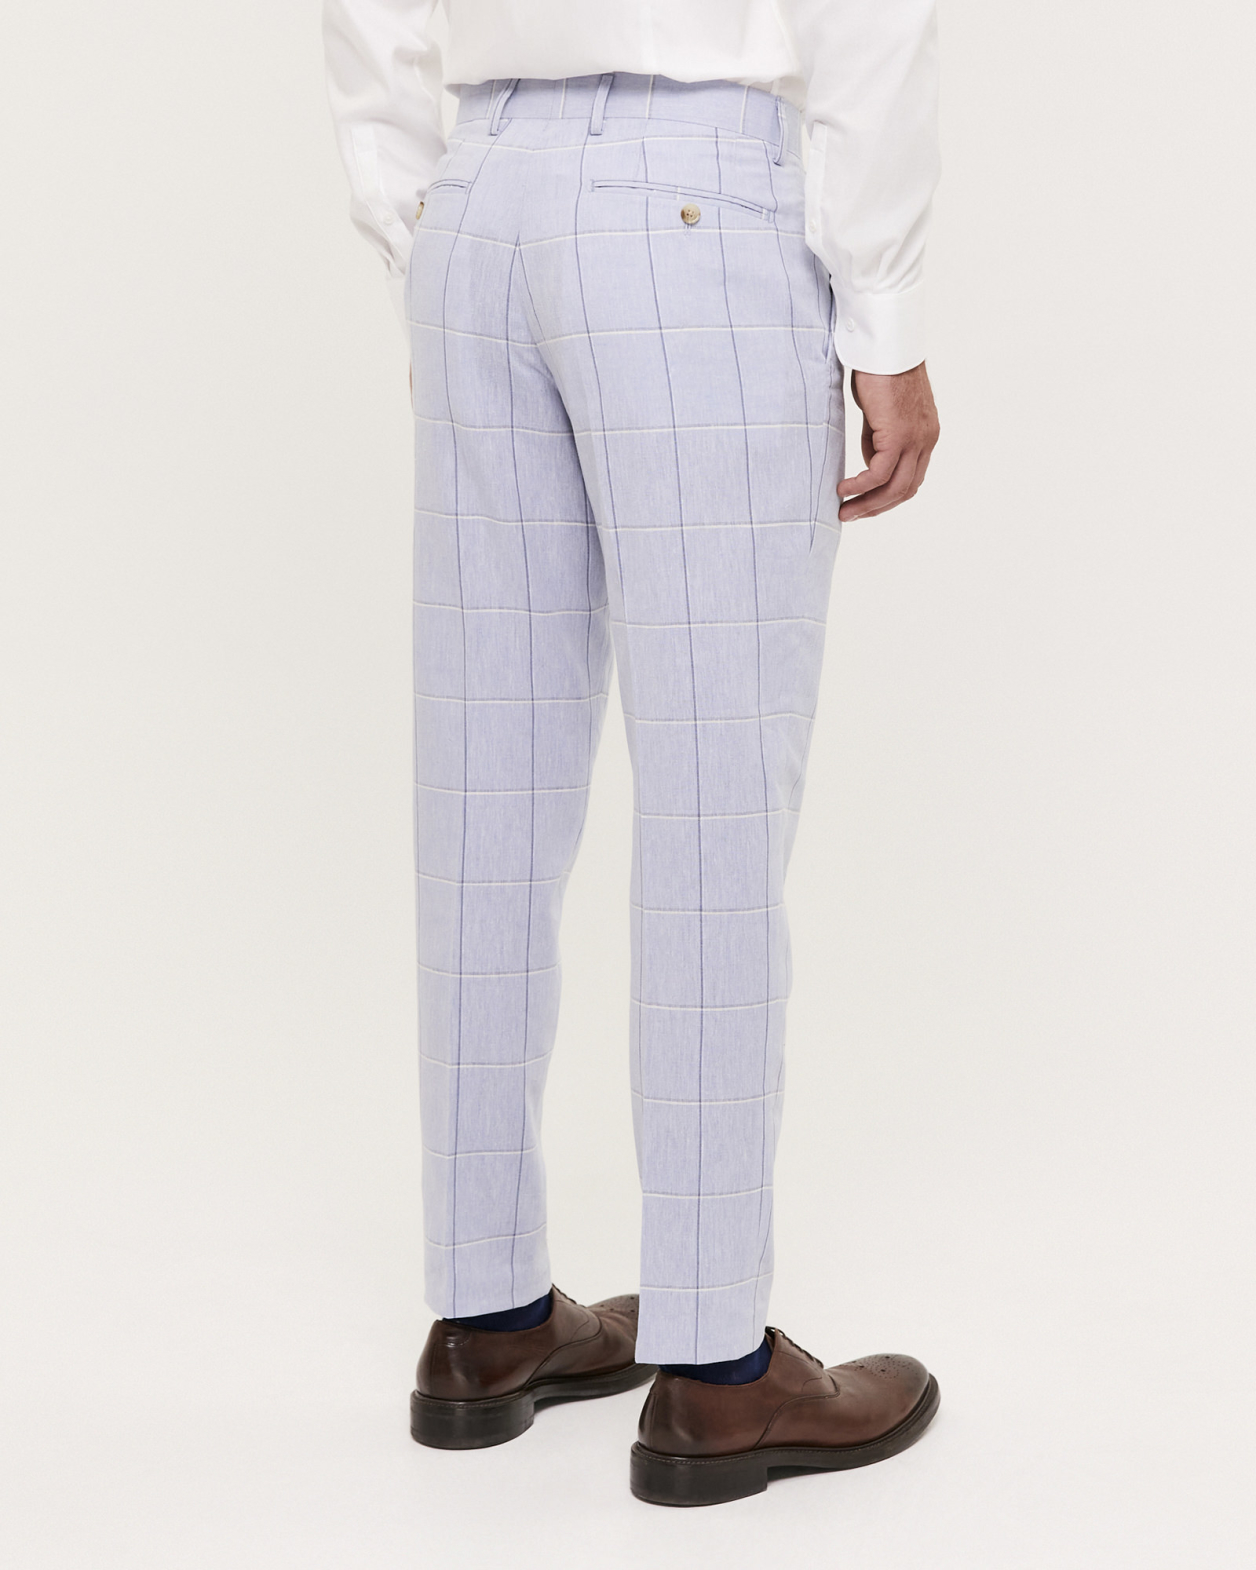 Danner Check Suit Pant in CHECK